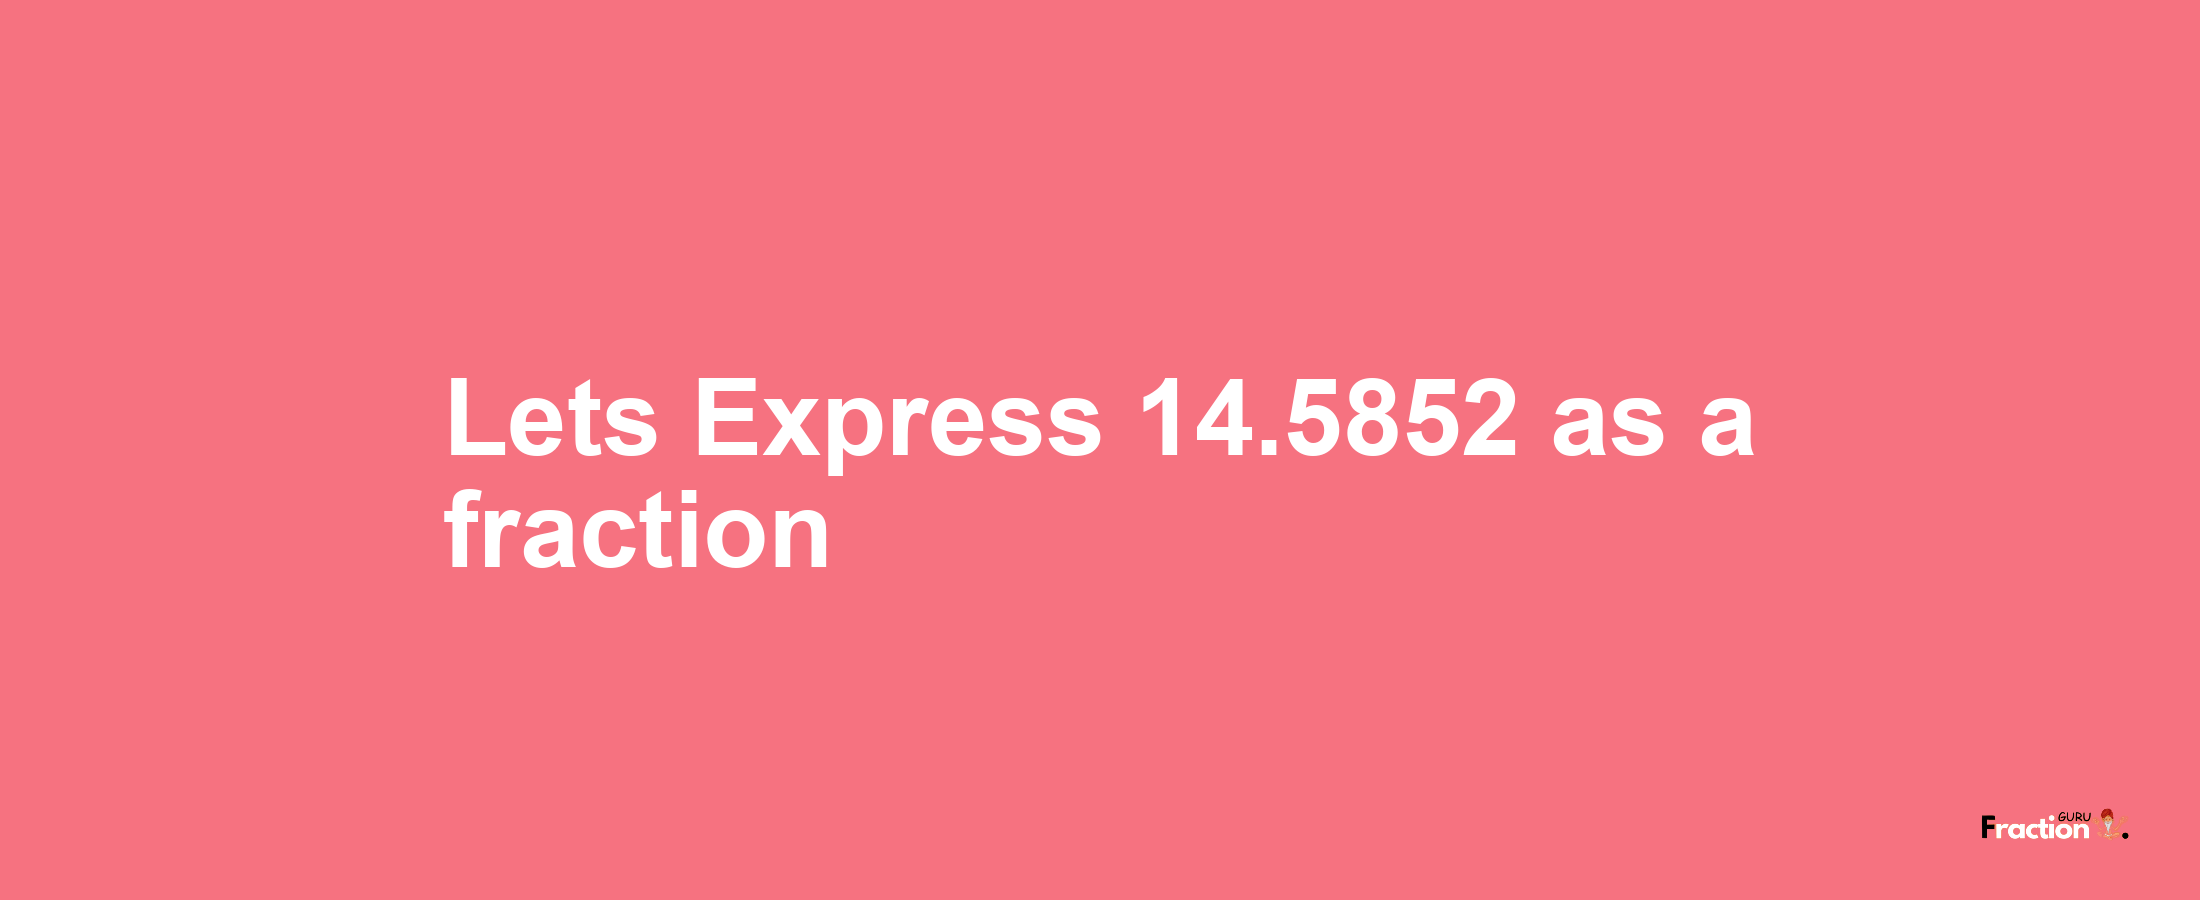 Lets Express 14.5852 as afraction